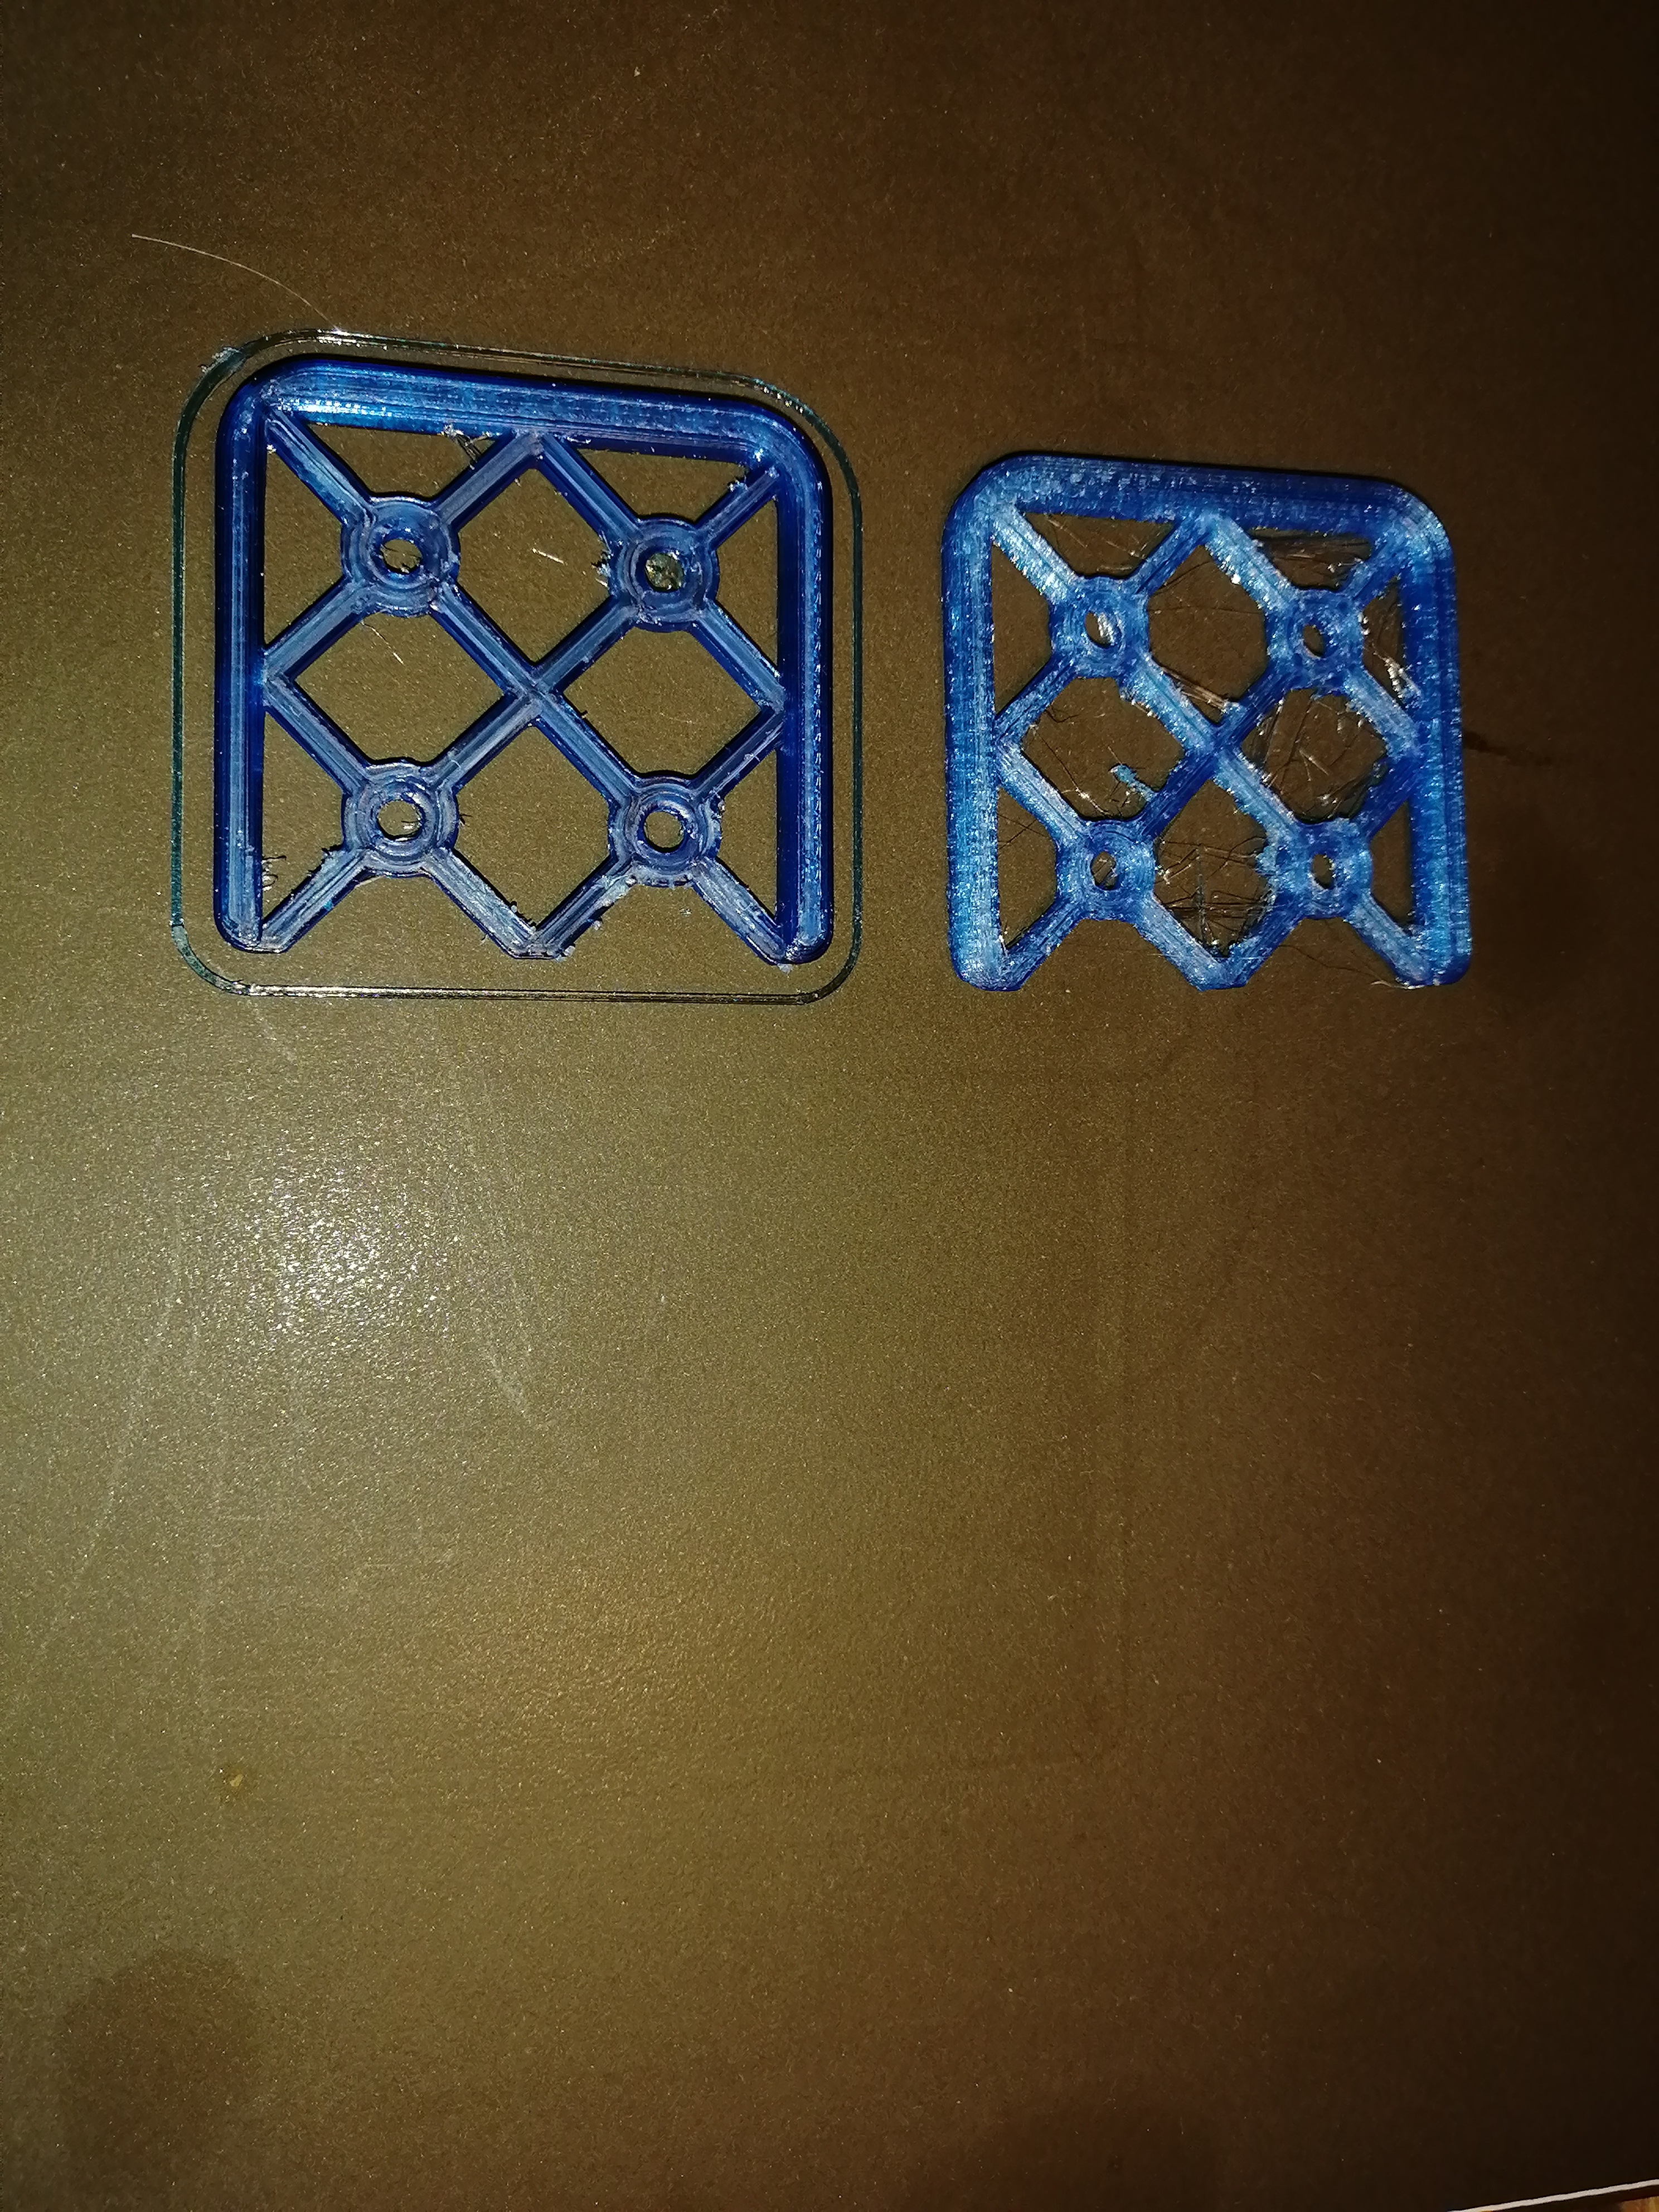 PETG: I Give Up! – How do I print this? (Printing help) – Prusa3D Forum